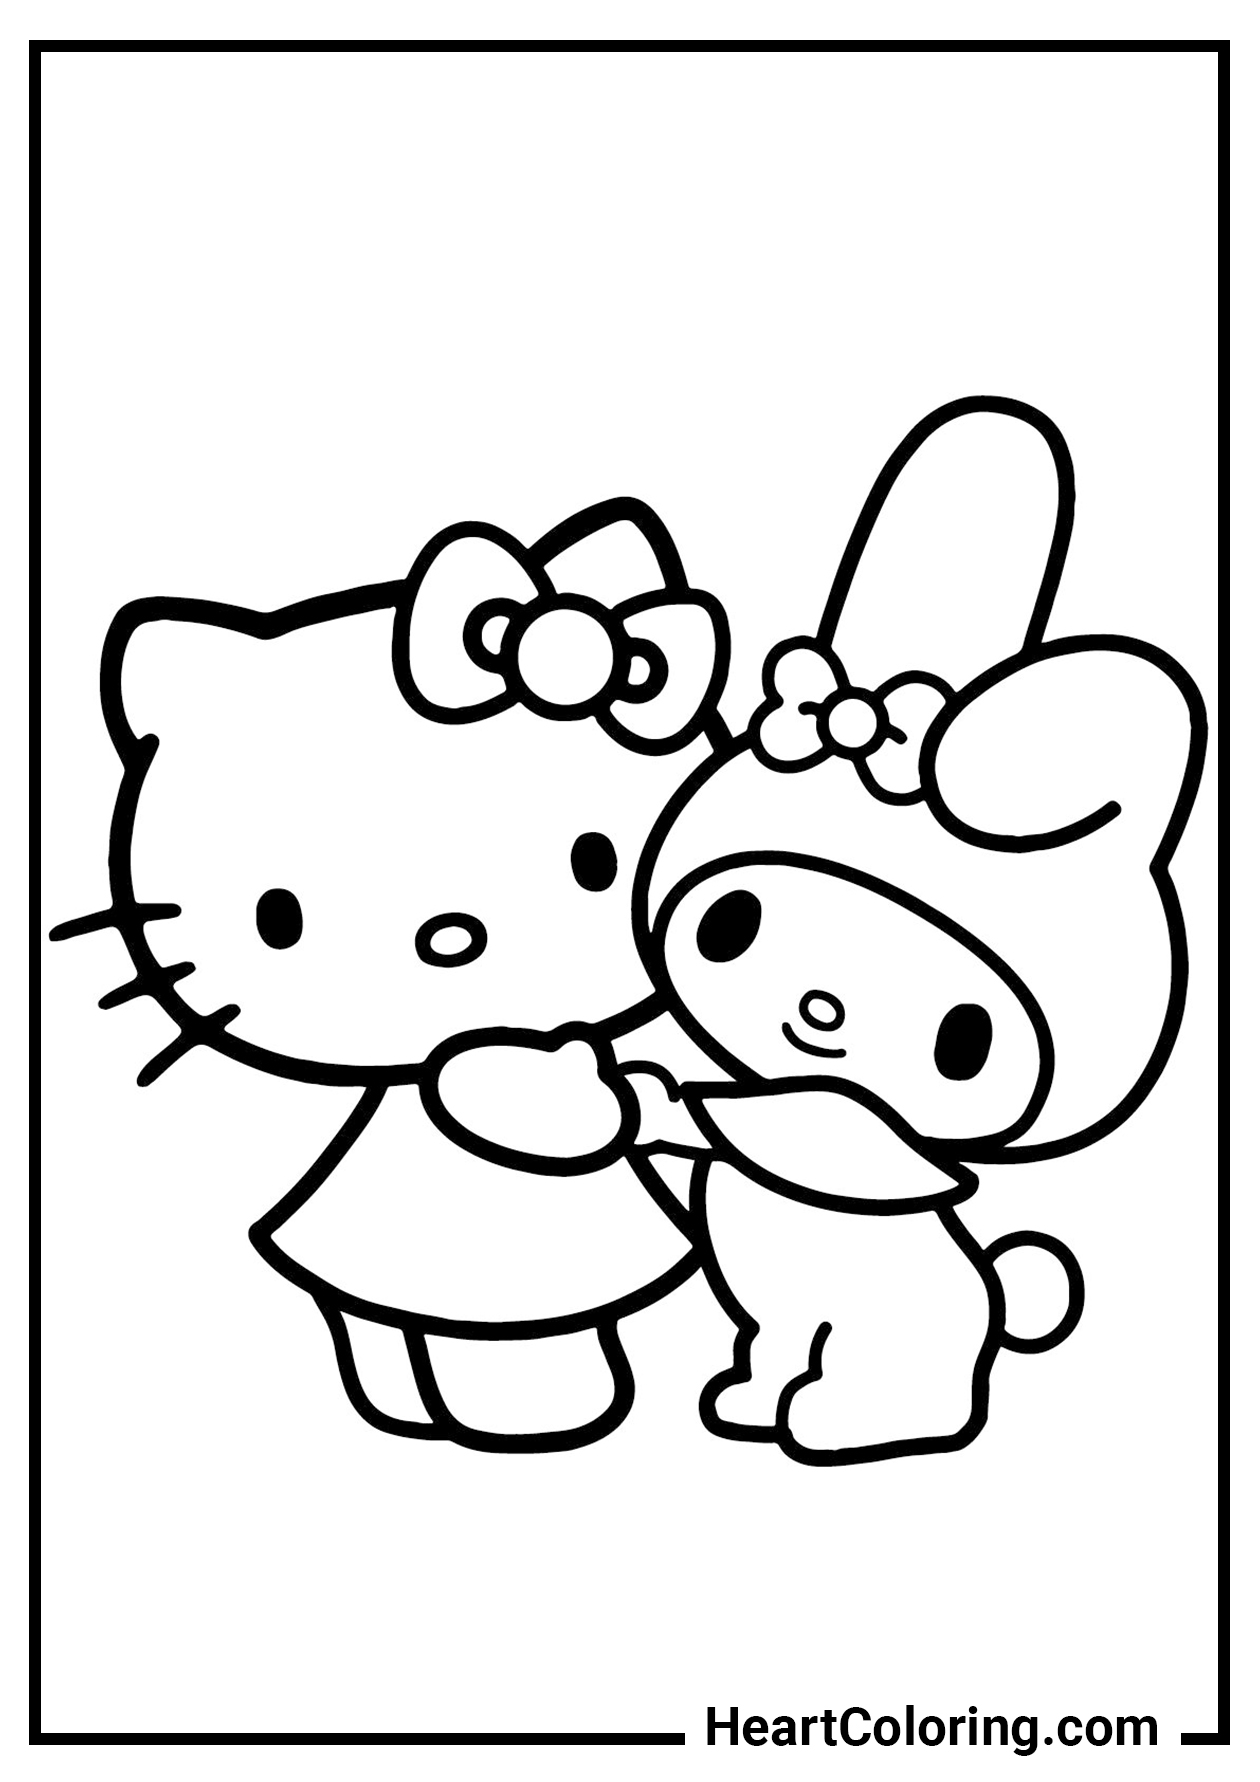 25+ Sanrio Characters Coloring Page